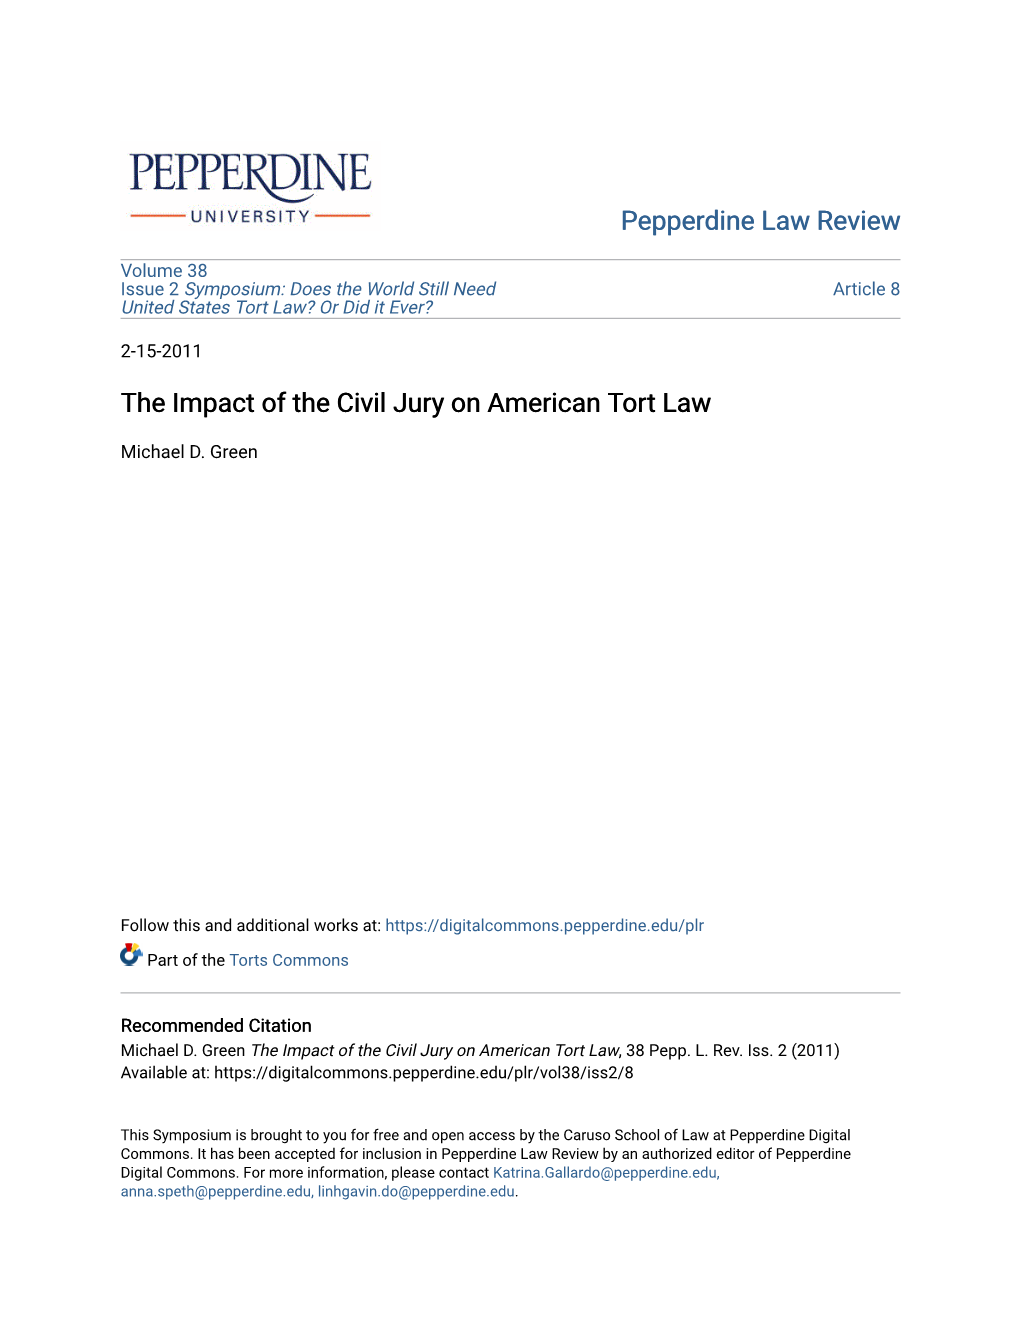 The Impact of the Civil Jury on American Tort Law